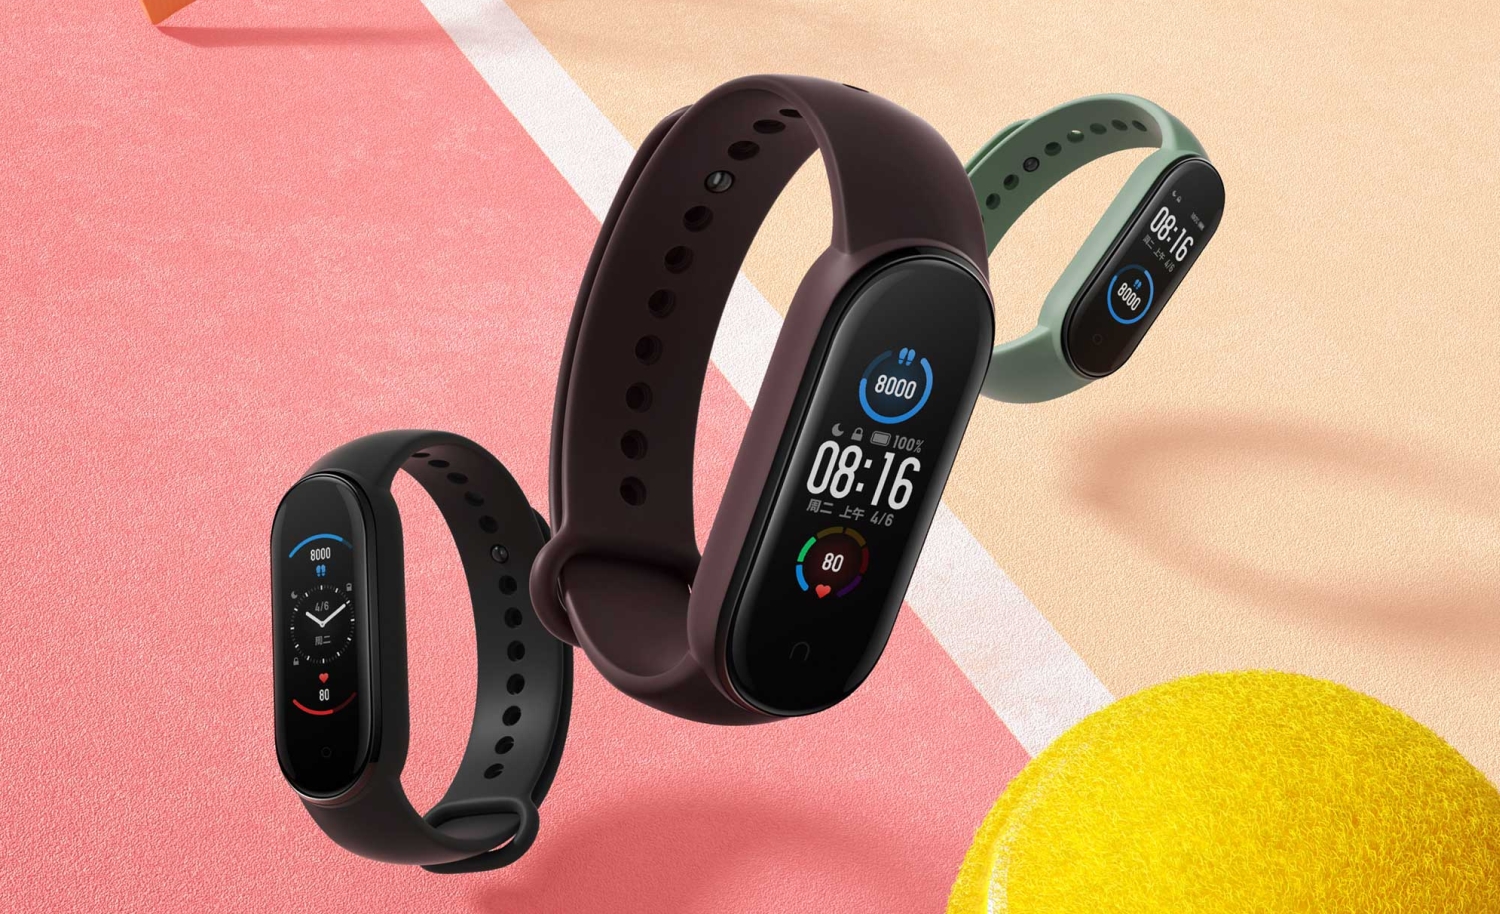 Mi Smart Band 5 is finally coming to Malaysia on 24th July